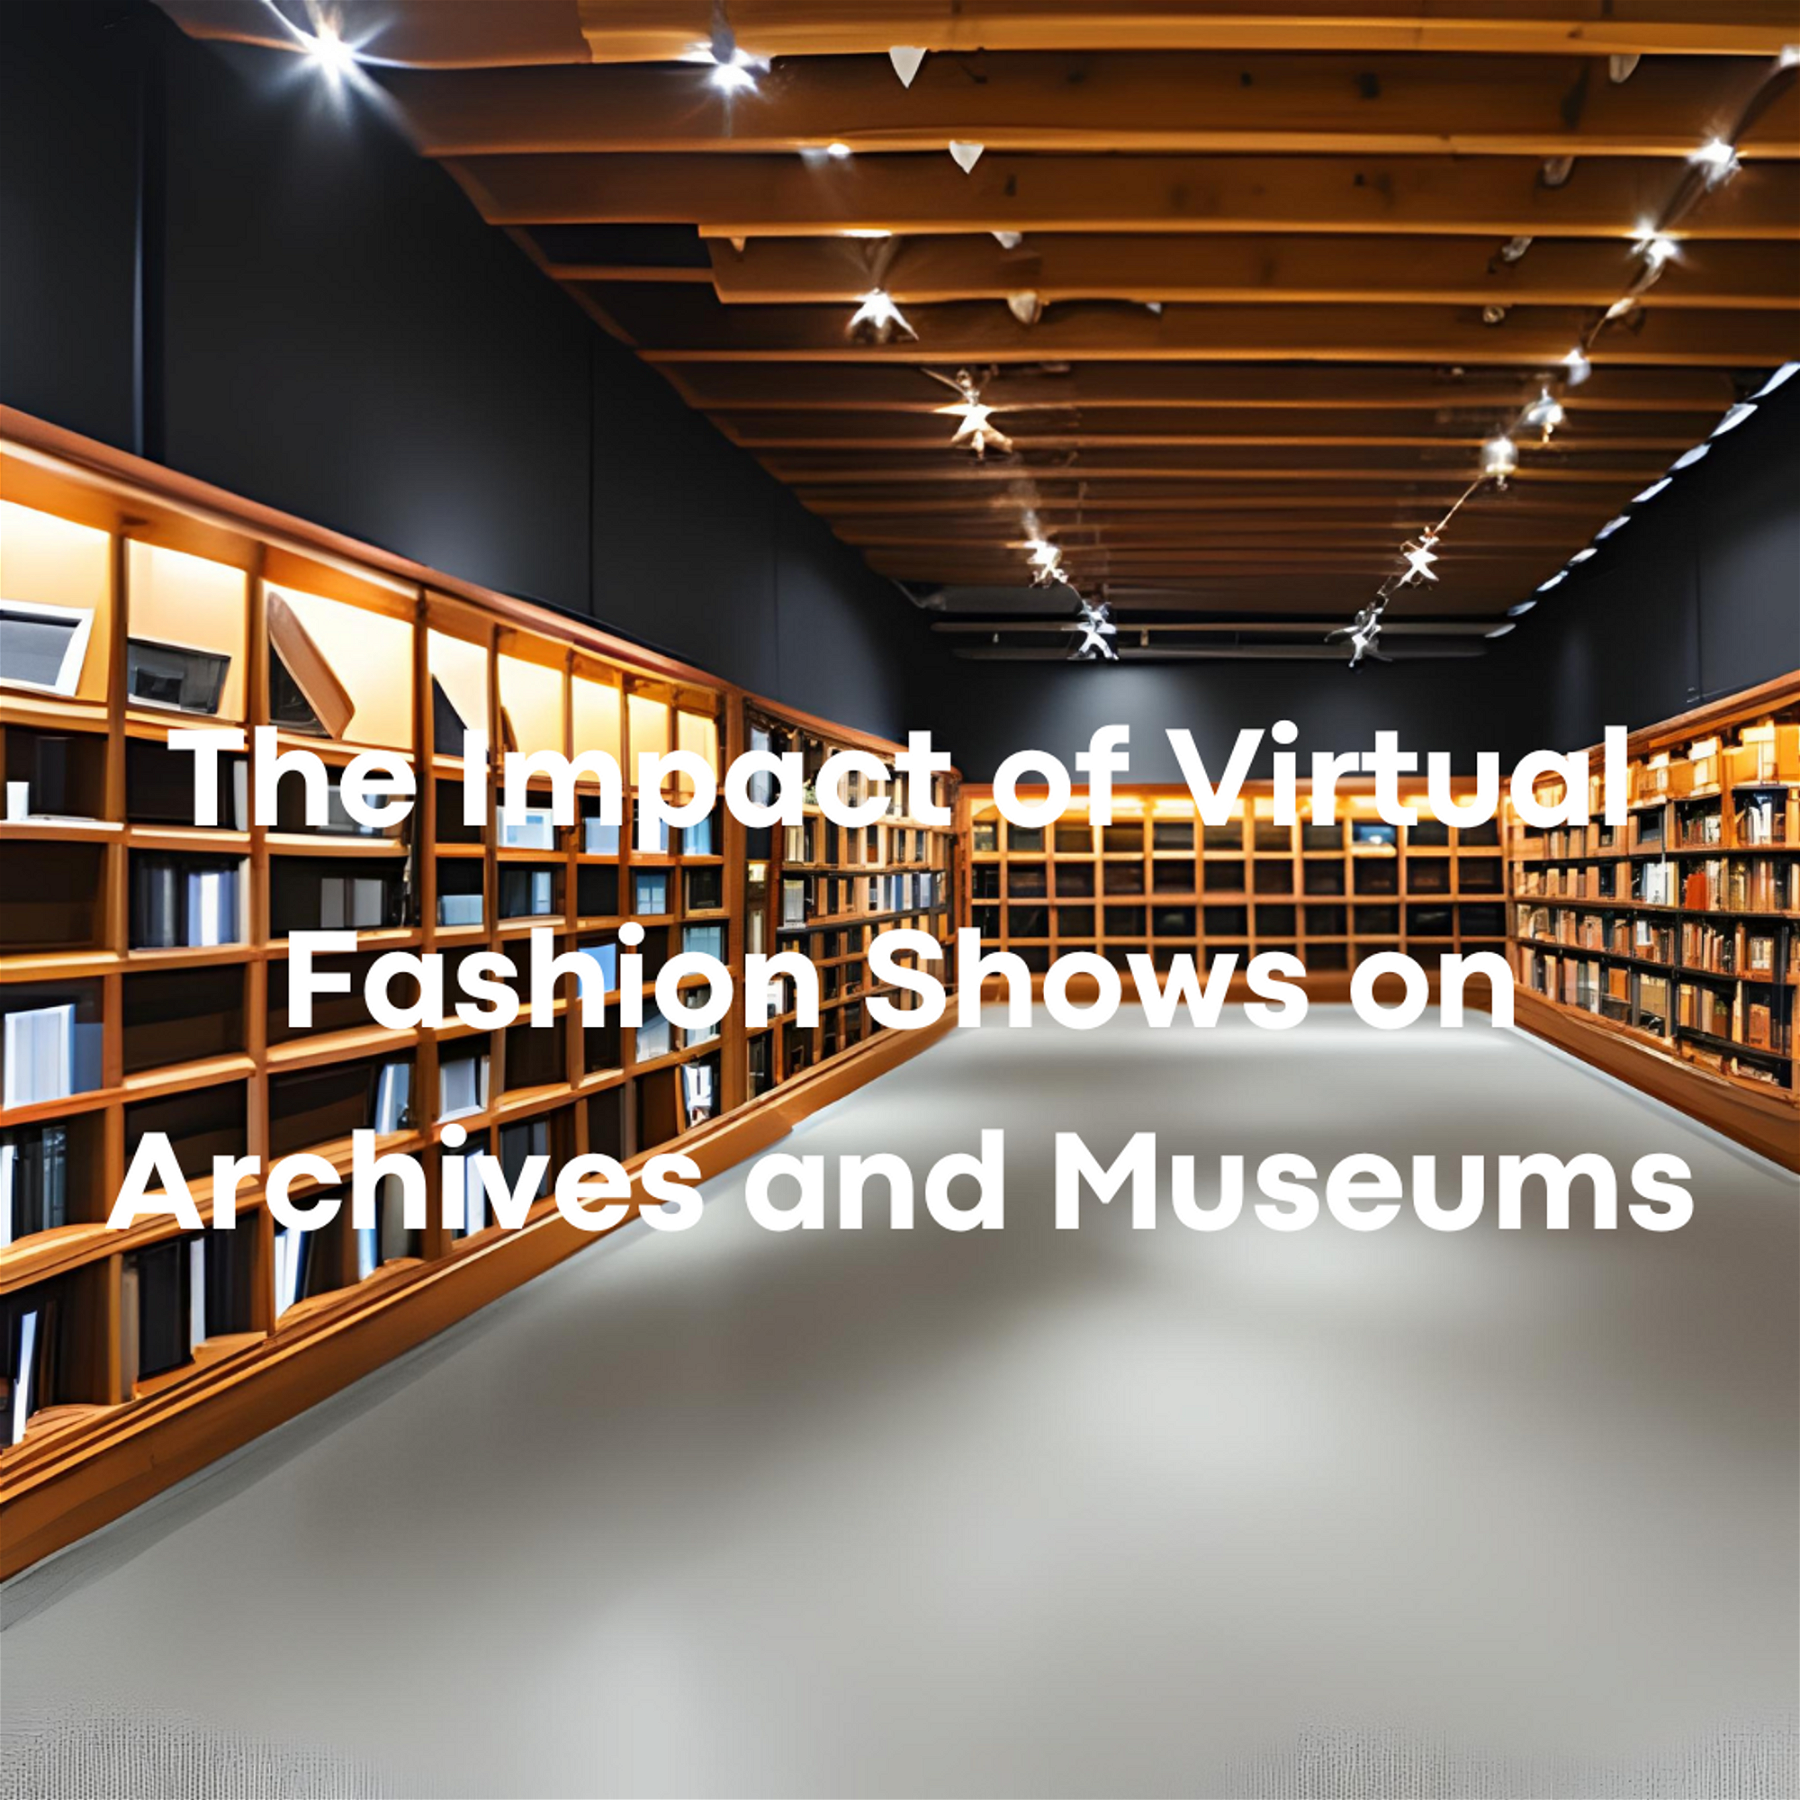 Reimagining Fashion History: The Impact of Virtual Fashion Shows on Archives and Museums